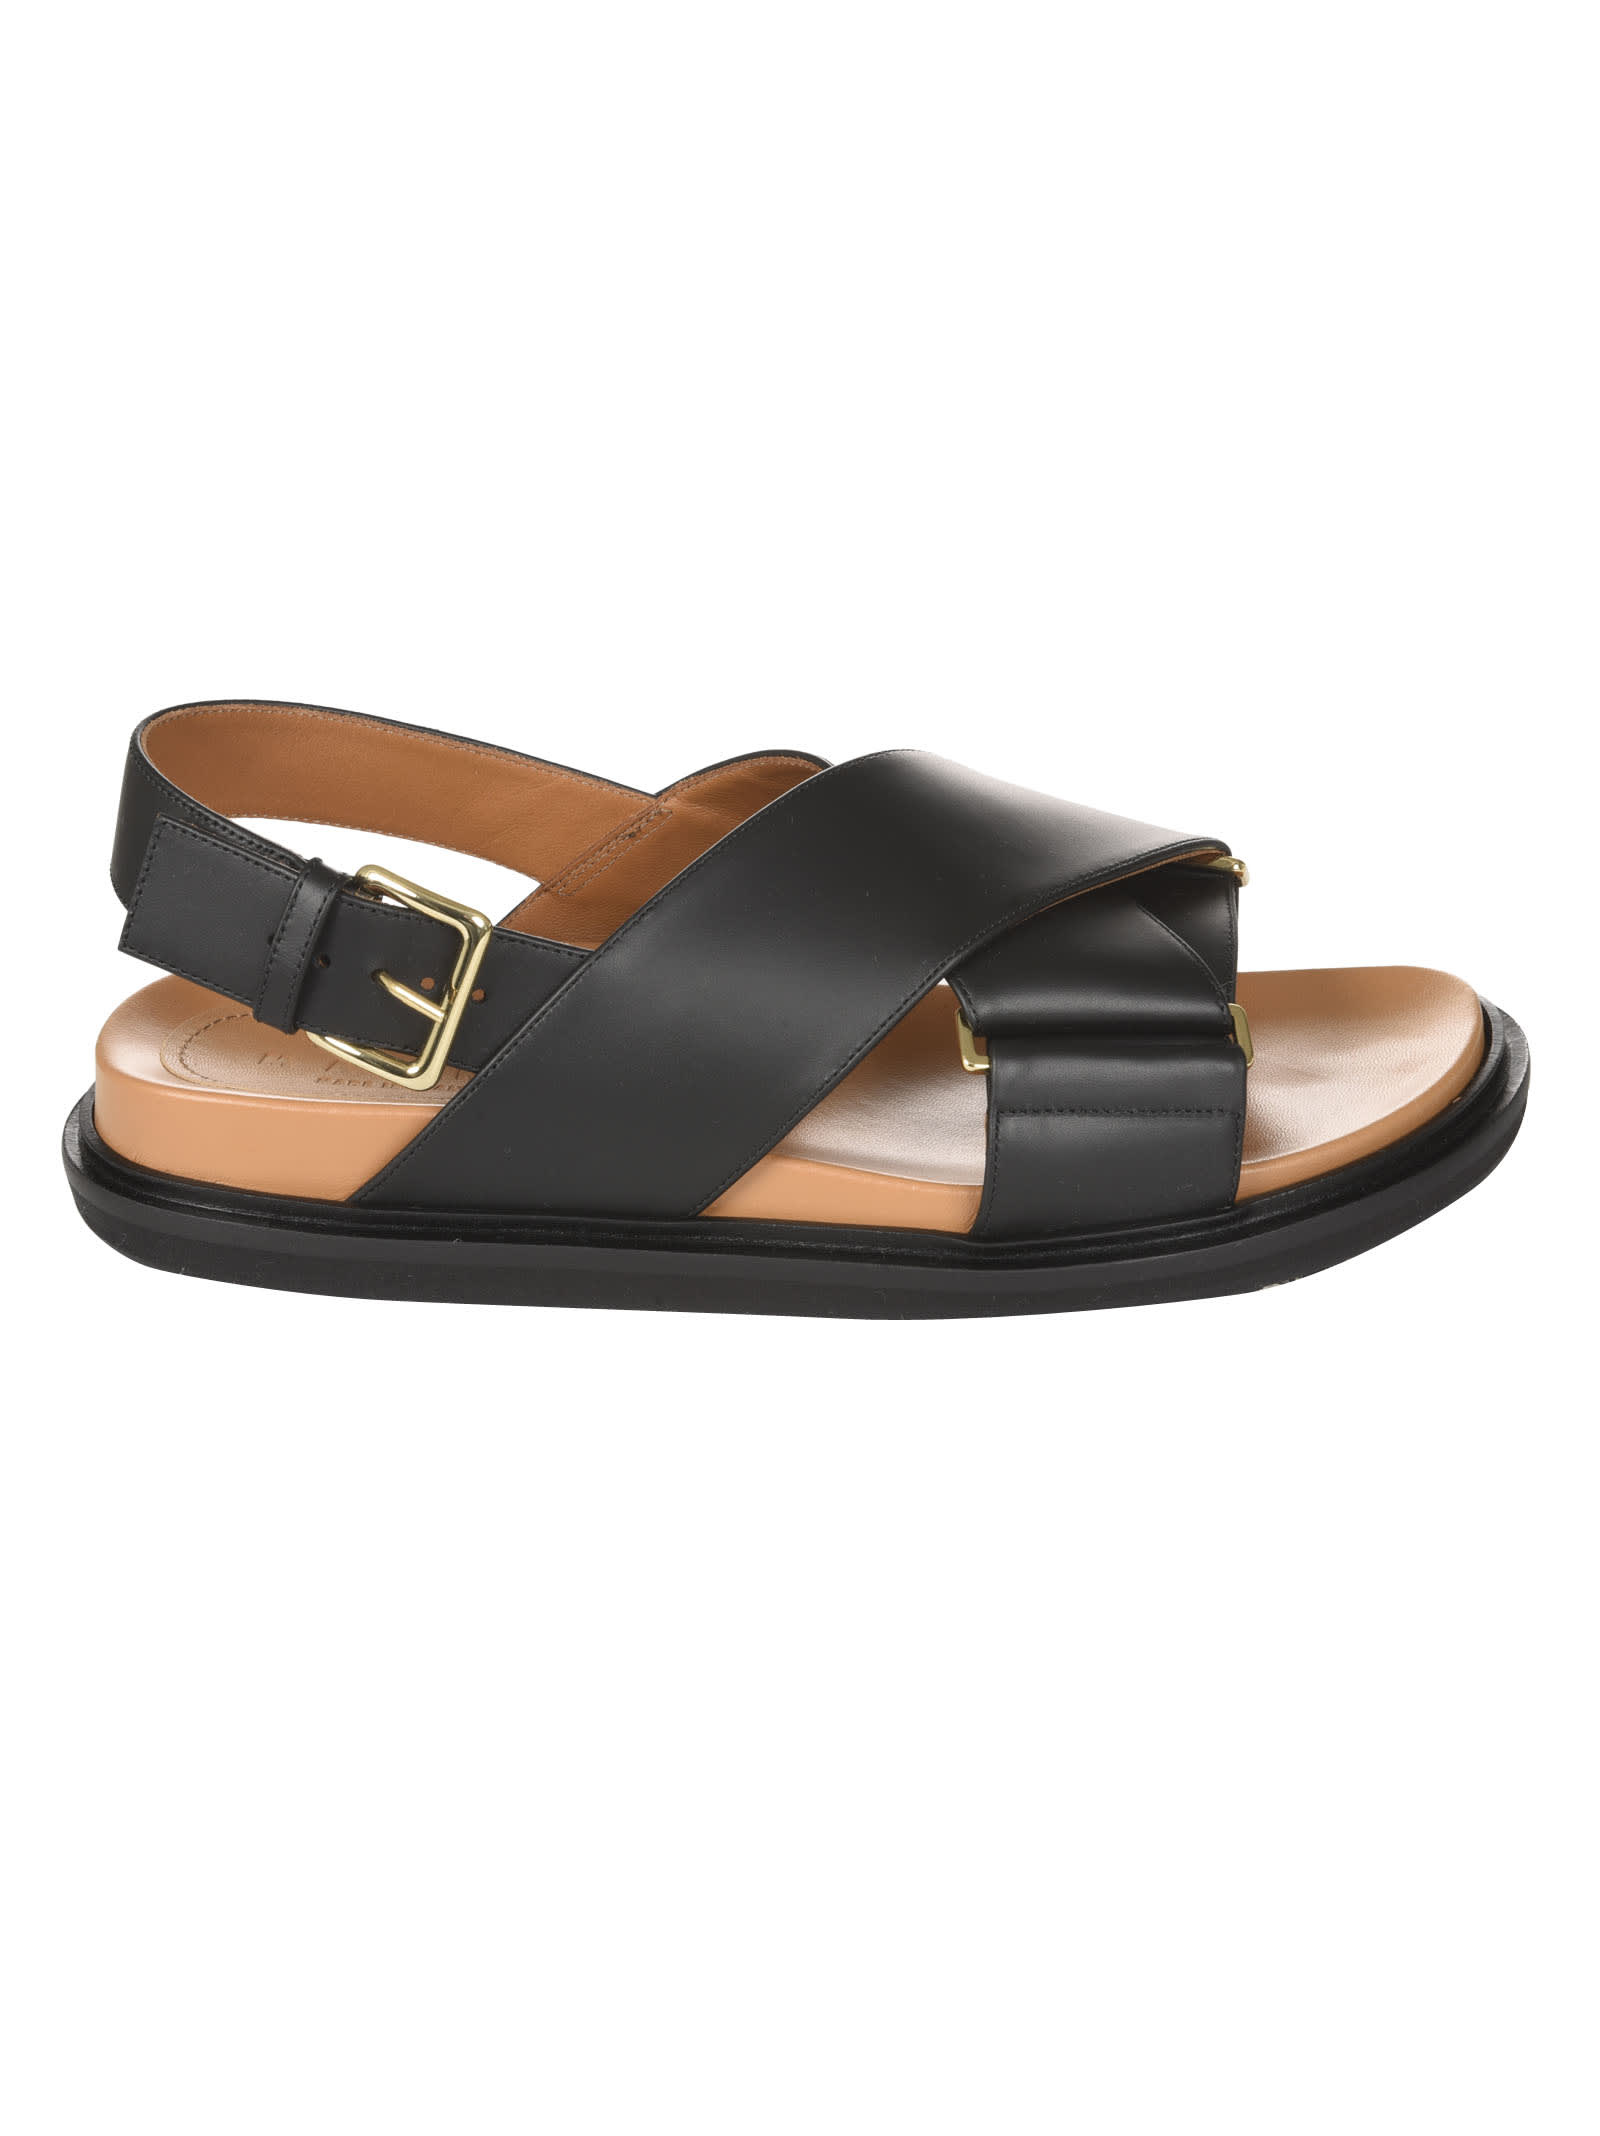 Buy Marni Back Buckle Strap Sandals online, shop Marni shoes with free shipping